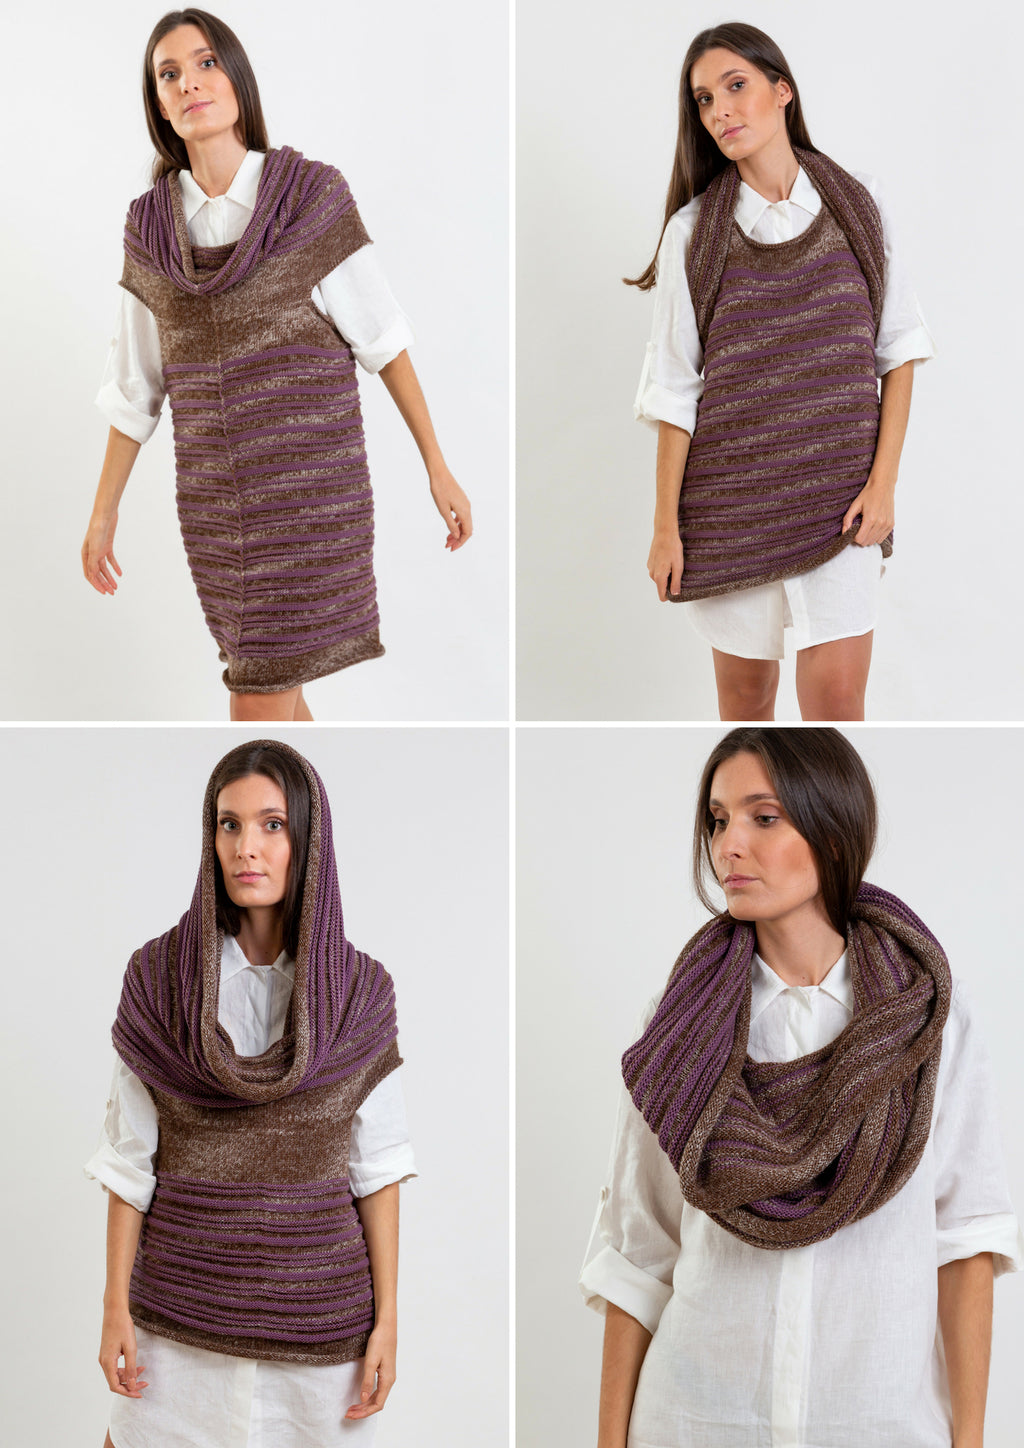 Multifunctional wool top in purple and brown which can be worn as a scarf or hoody top.